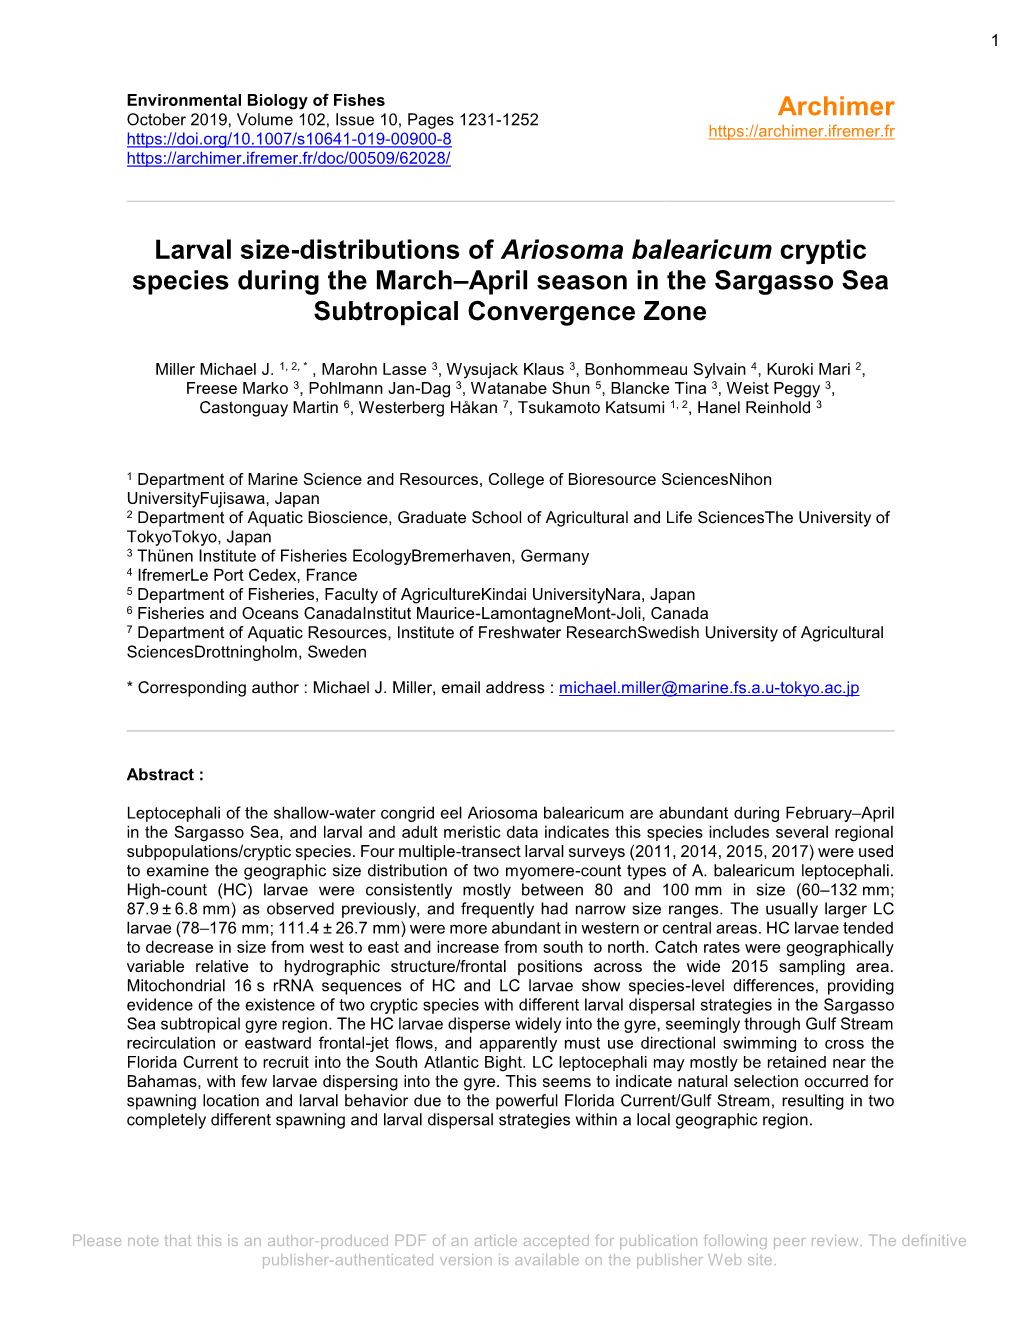 Larval Size-Distributions of Ariosoma Balearicum Cryptic Species During the March–April Season in the Sargasso Sea Subtropical Convergence Zone